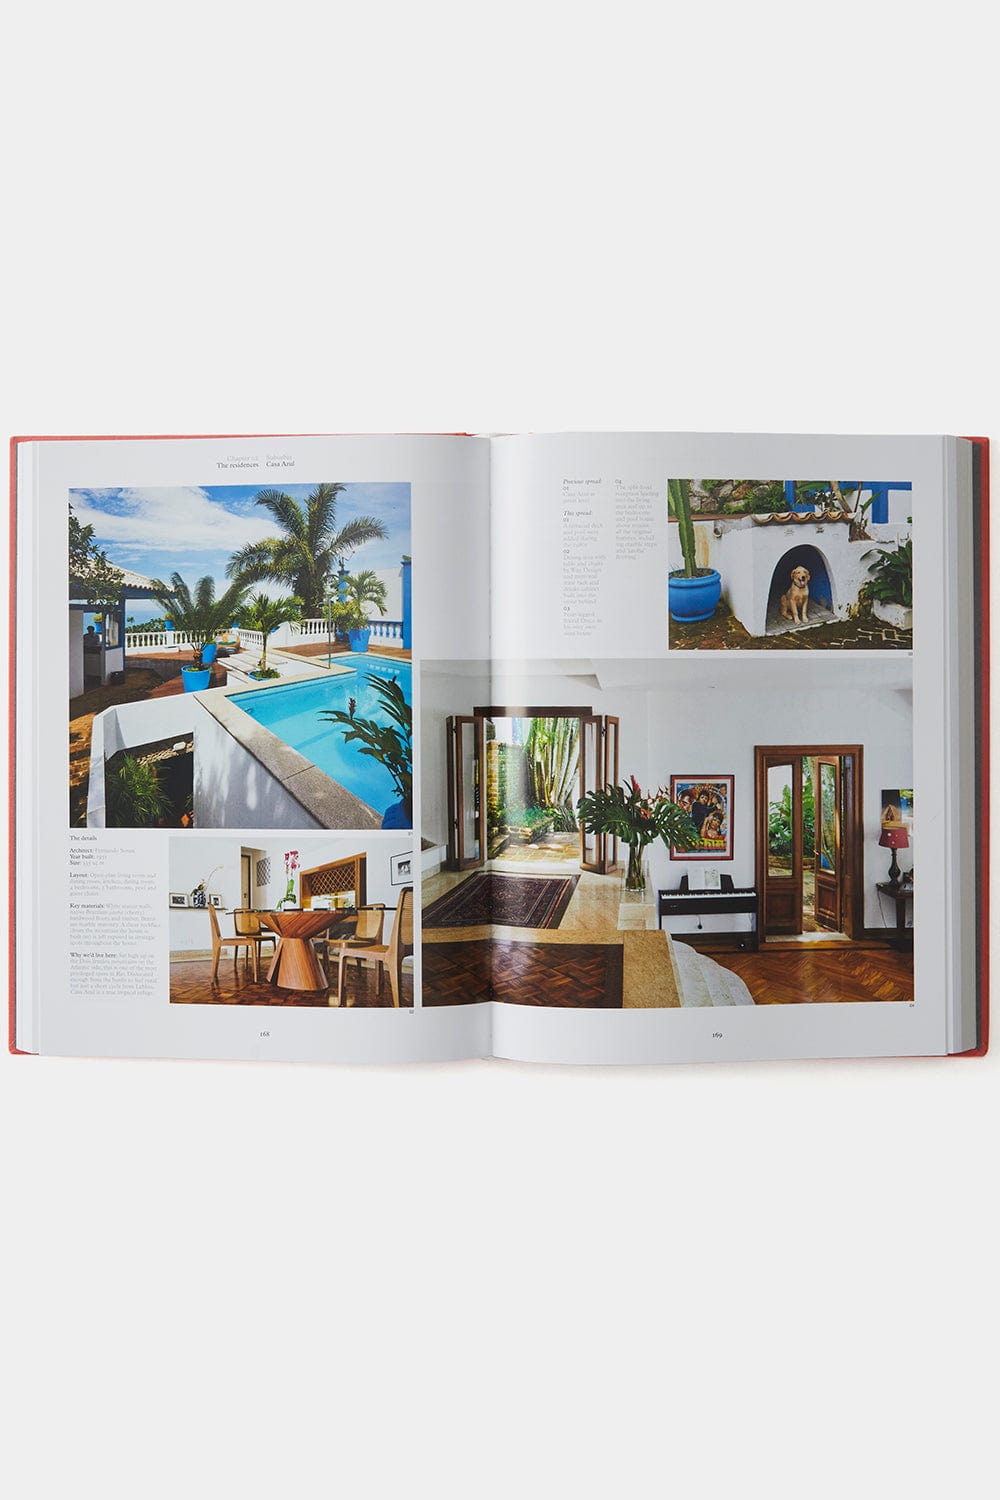 Le livre The Monocle Guide To Cozy Homes 